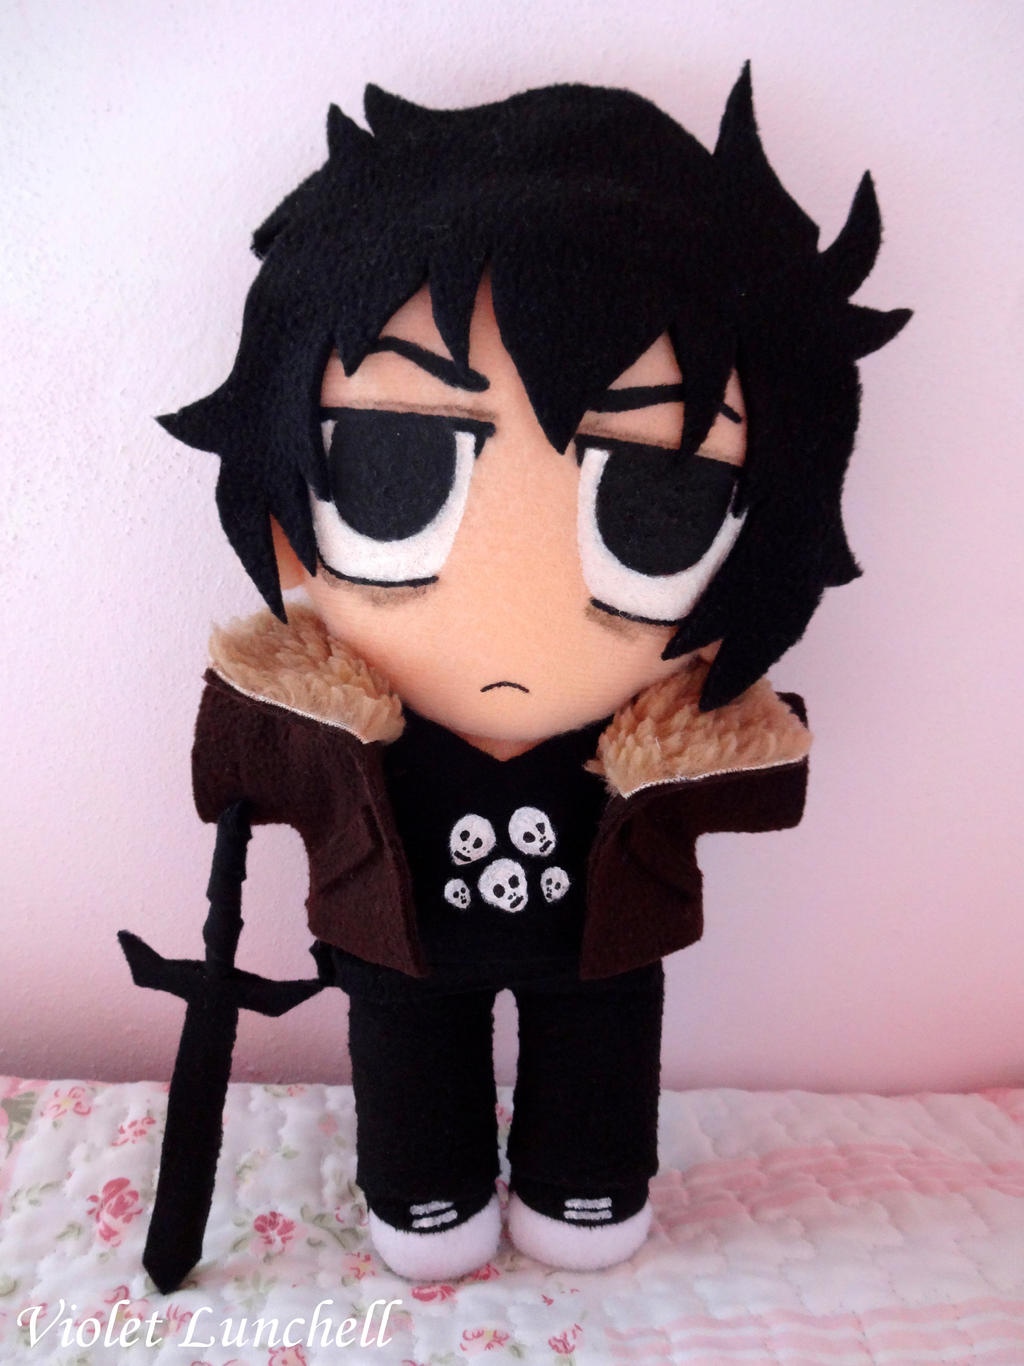 Percy Jackson Nico di Angelo plushie by VioletLunchell on DeviantArt